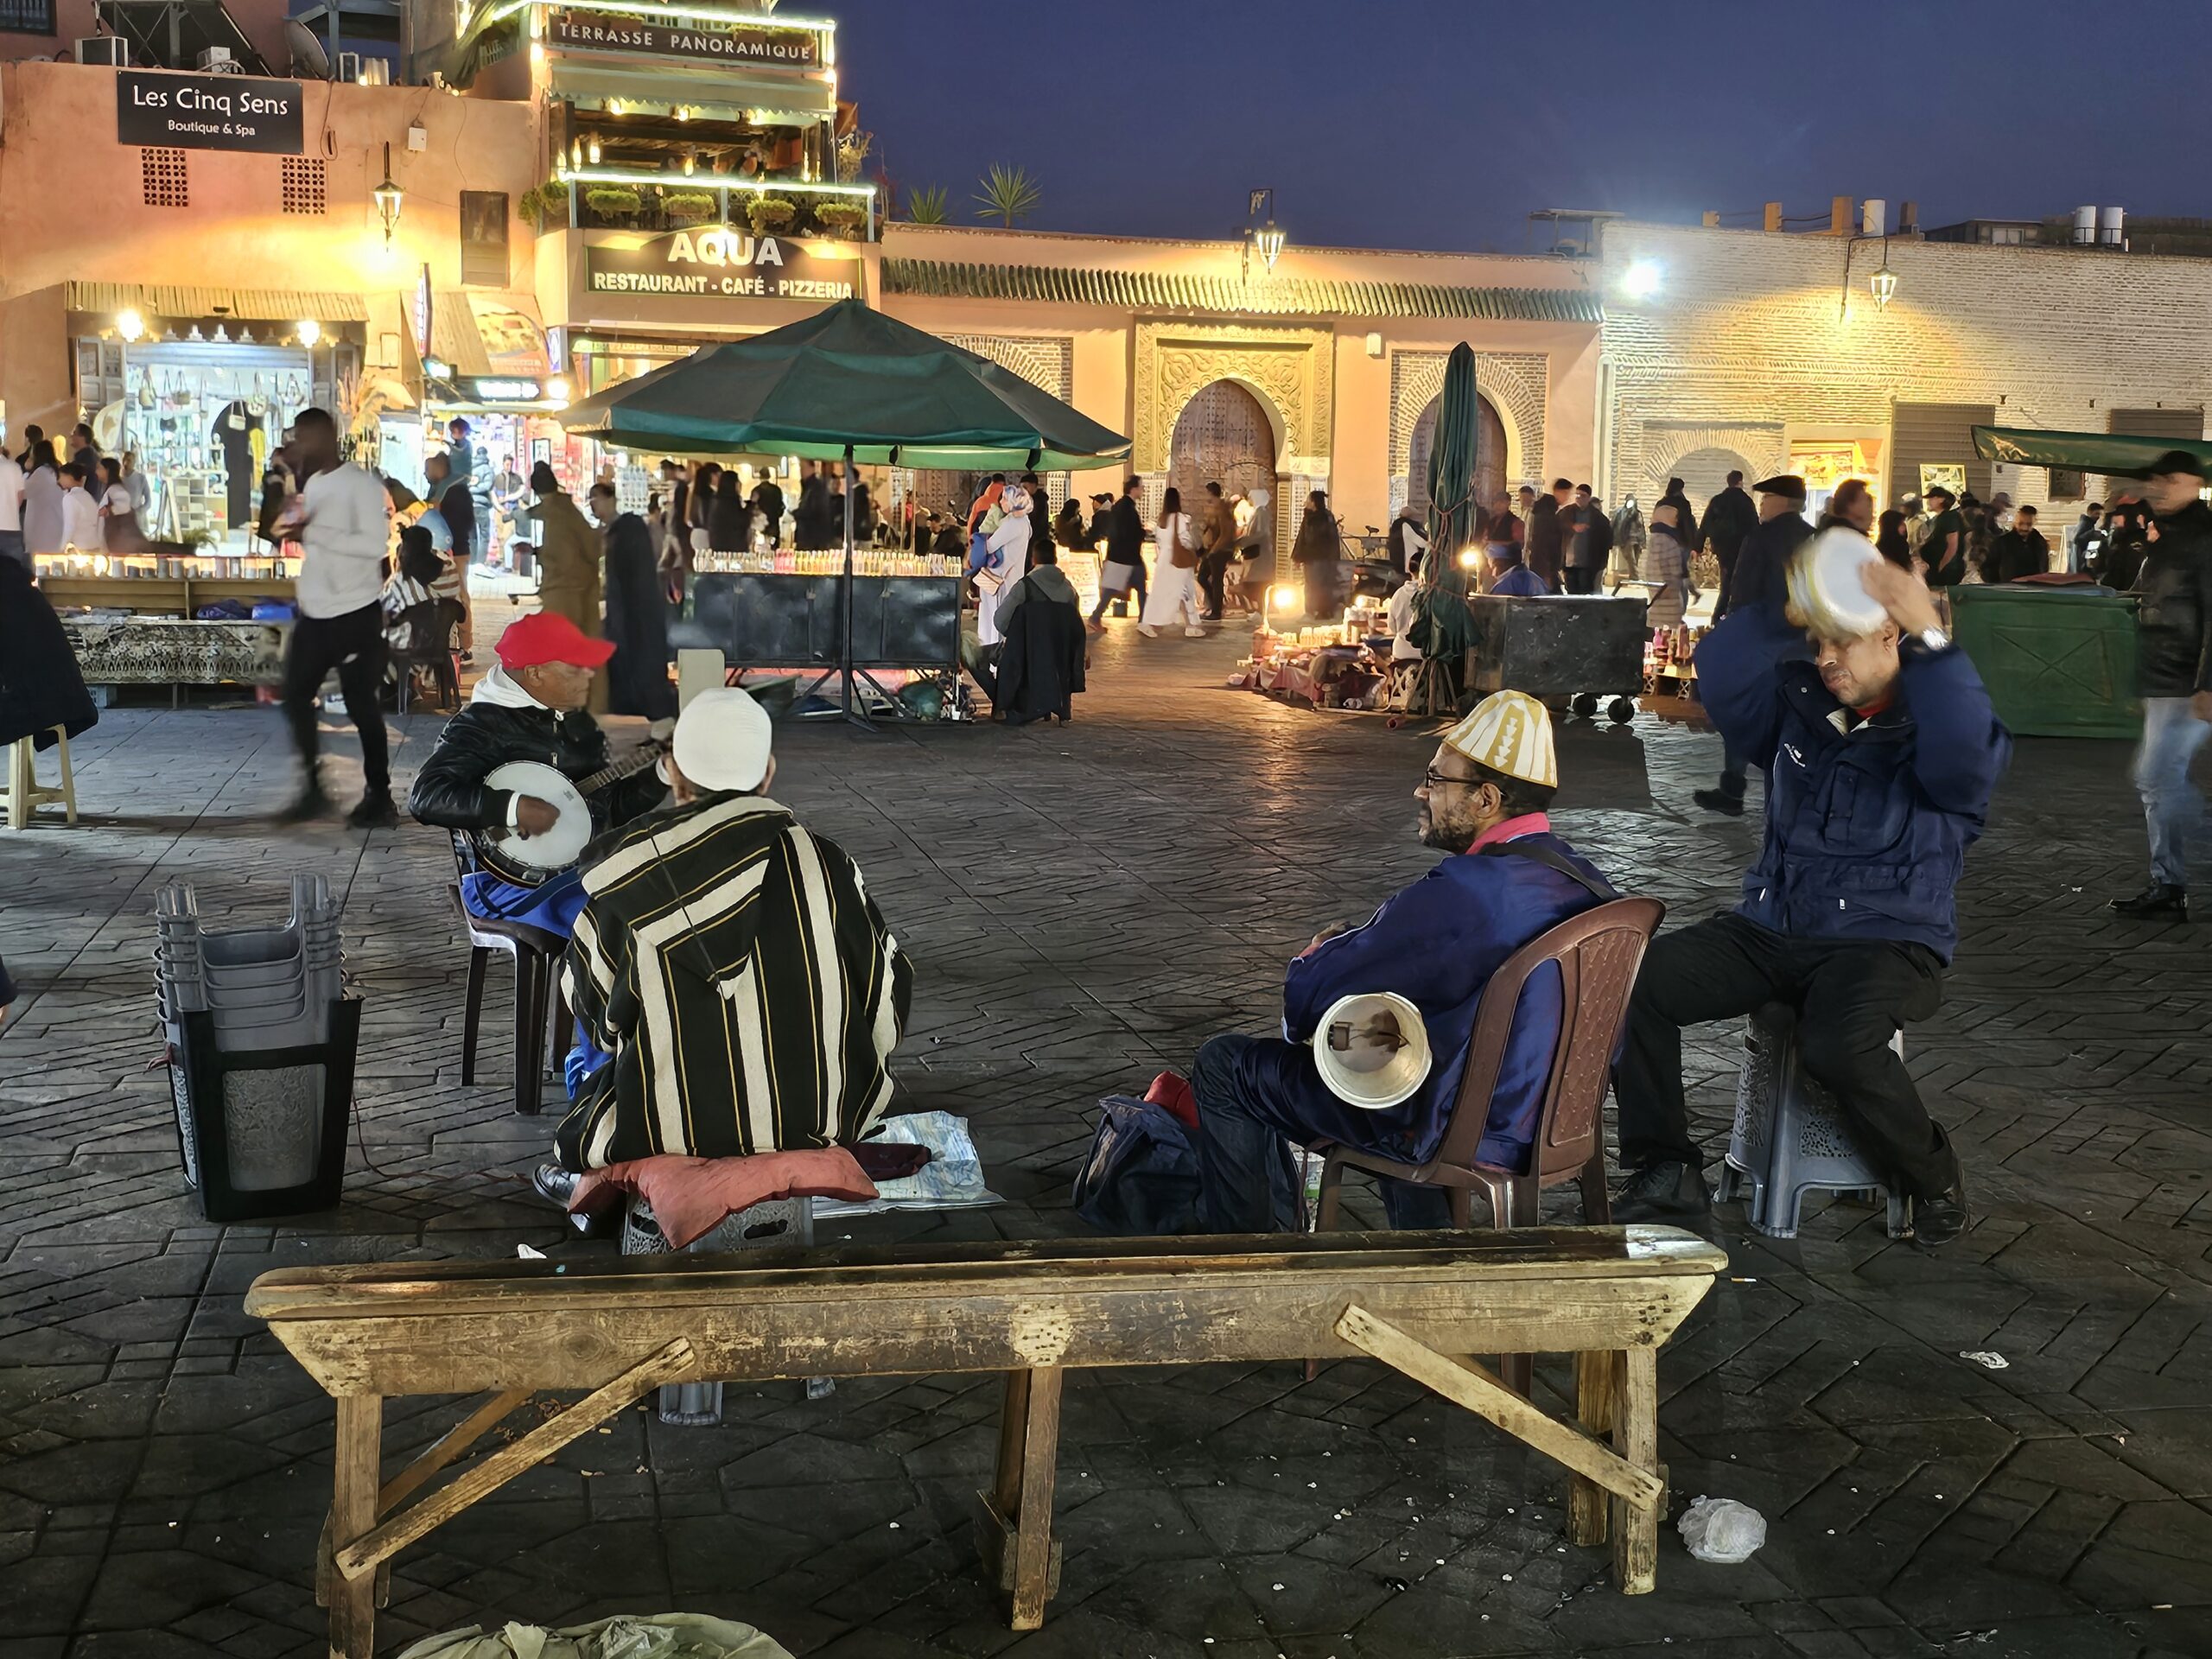 Two men sitting on plastic chairs with their back to the camera looking at the activity around Jemaa el Fnaa, Marrakesh. Image by 360onhistory.com